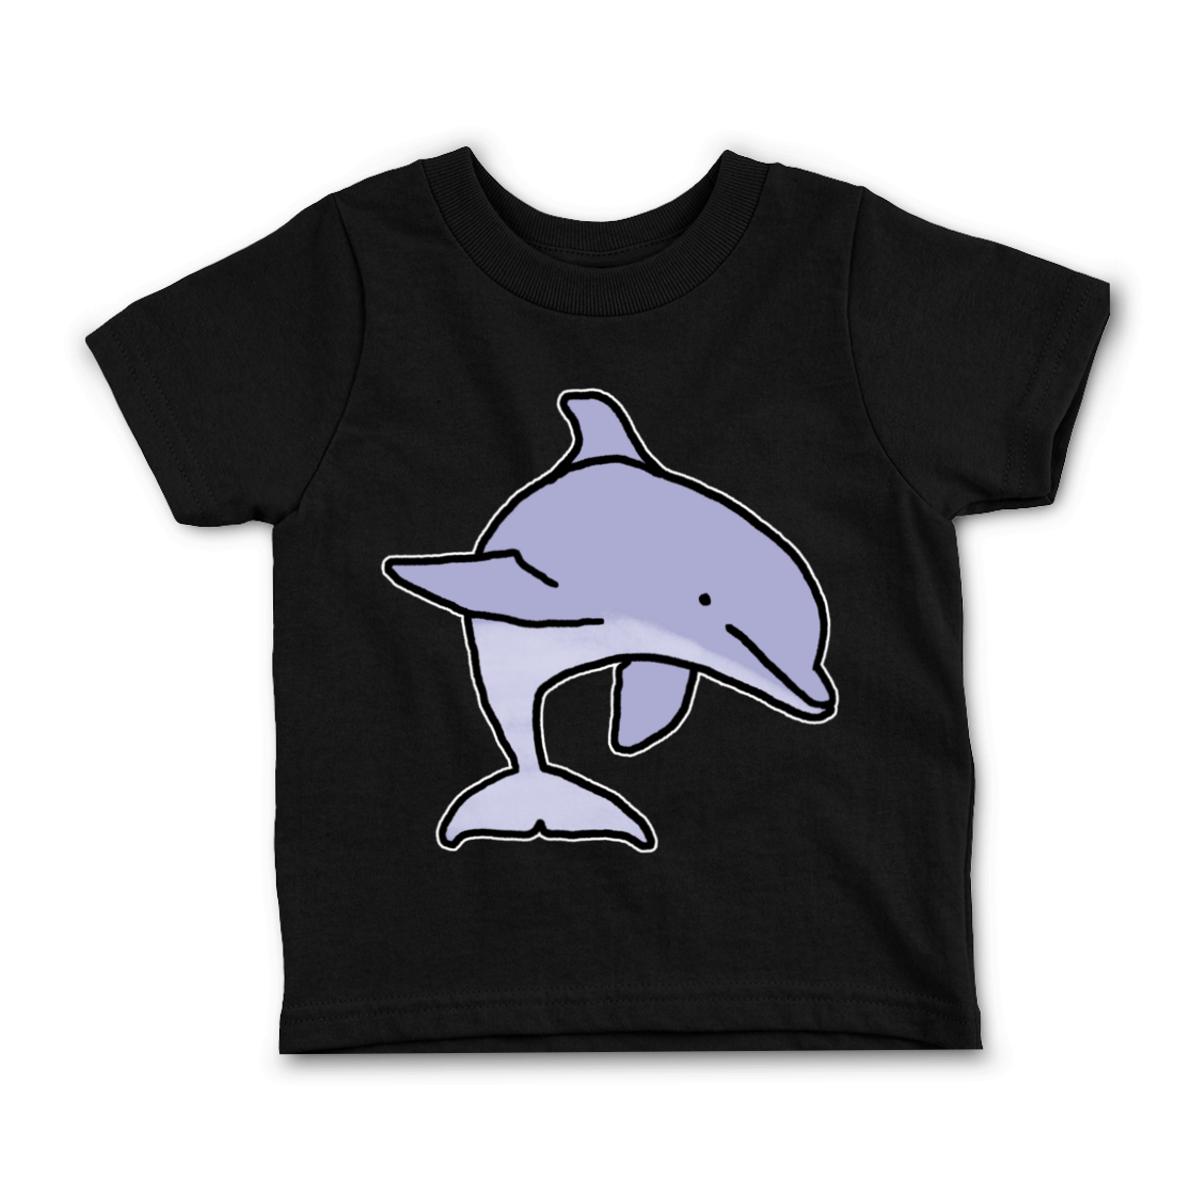 Dolphin Toddler Tee 2T black